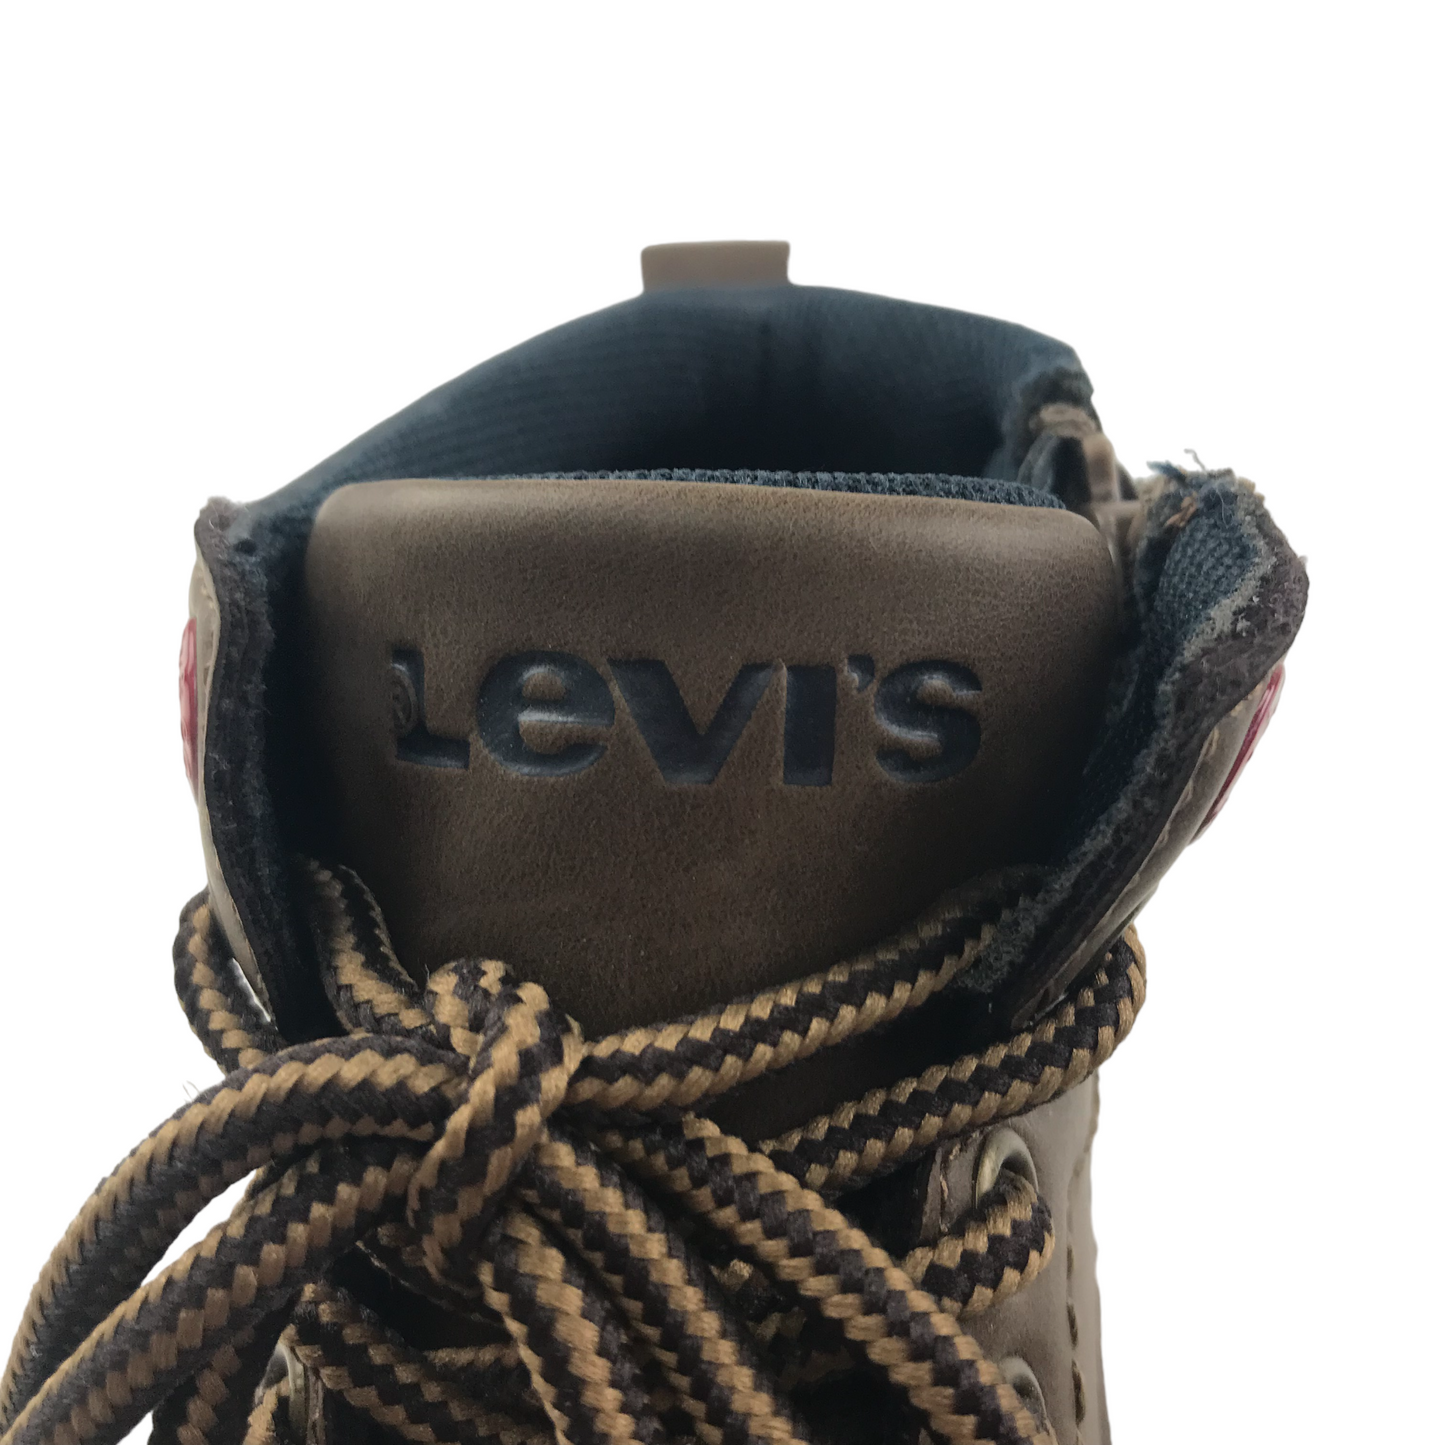 Levi's Boots Shoe Size 10.5 Junior Brown Leather with Laces